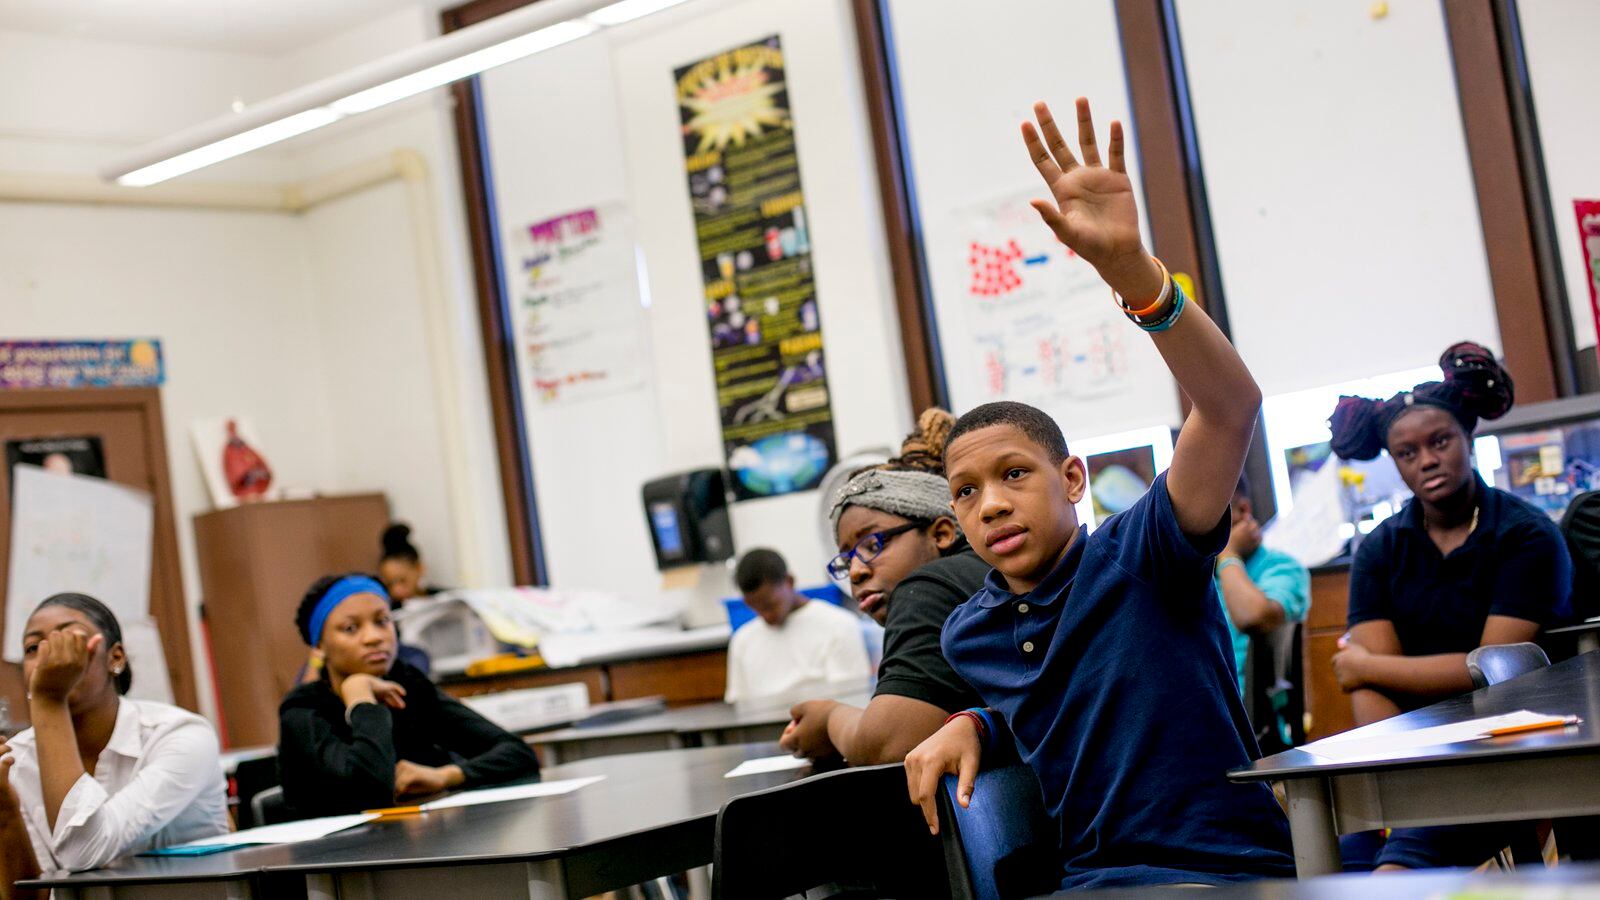 Jamarie Samuel attended seven schools by eighth grade, enrolling mid-seventh grade at Bethune Elementary-Middle School which, like many schools in Detroit, has chronic problems with students switching schools.